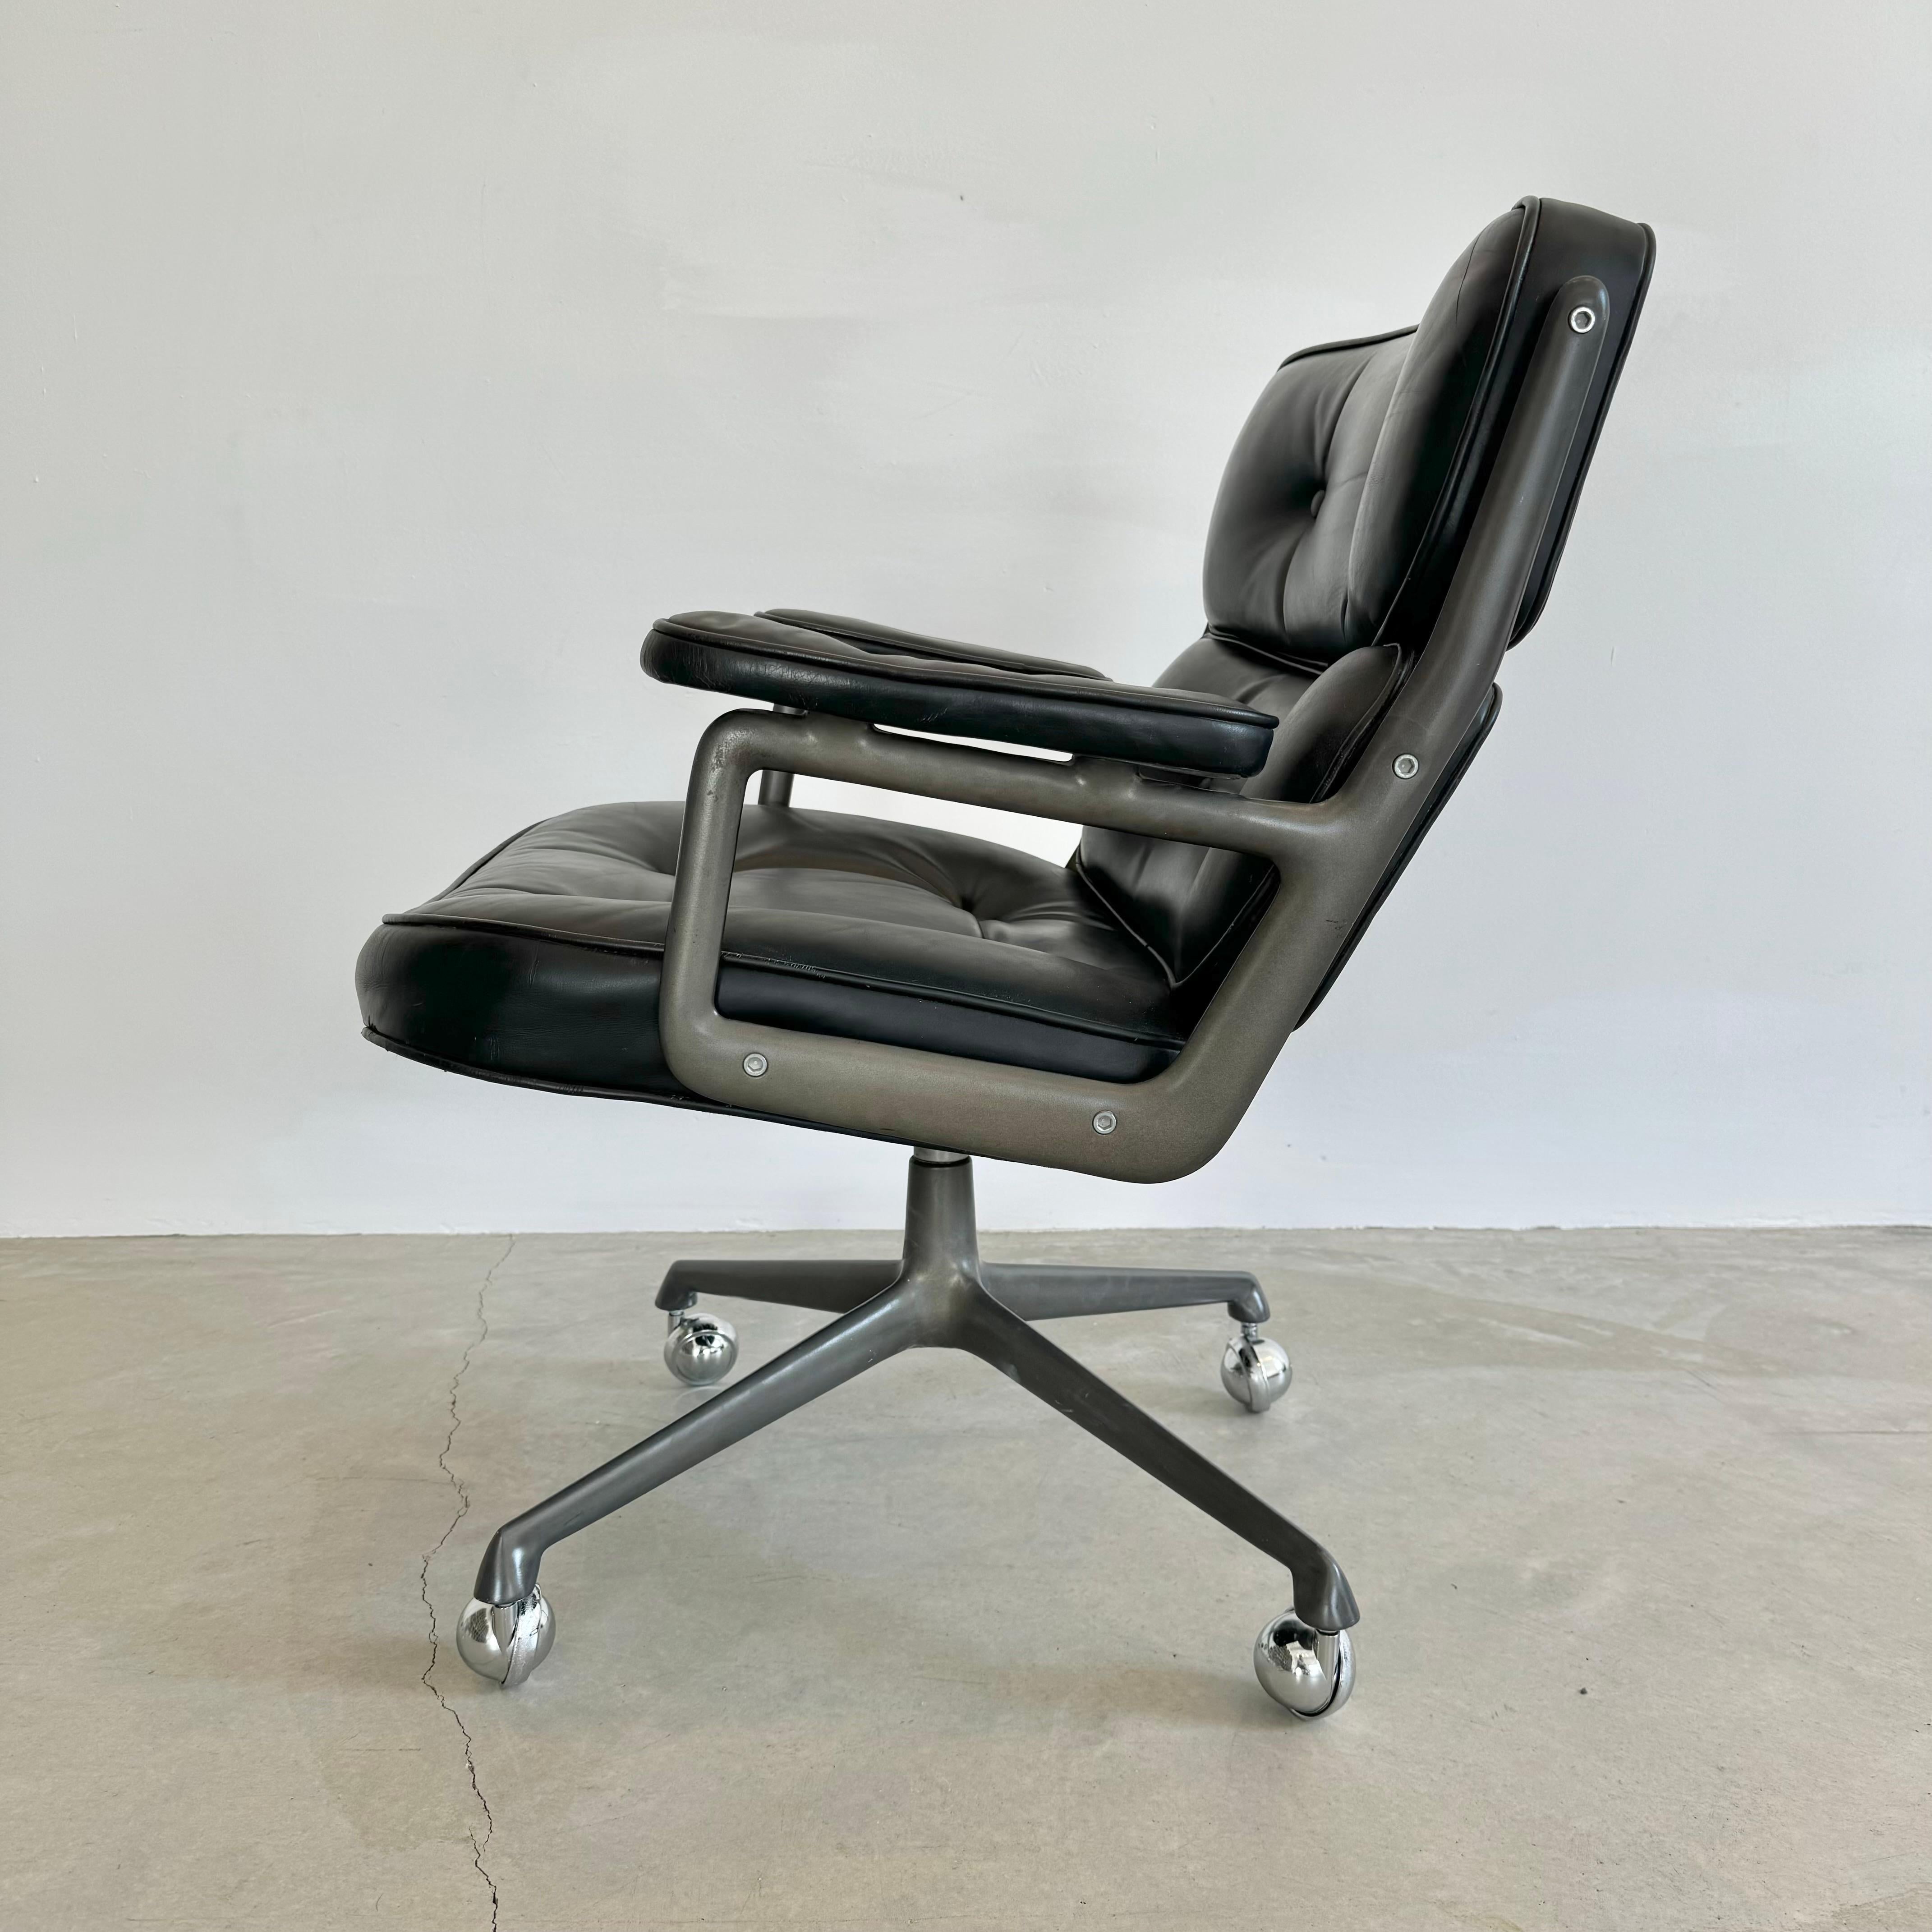 Classic Eames Time Life Lobby Chair in black leather for Herman Miller. Black leather is in good condition with wear as shown. Extremely comfortable and worn in. Chair swivels. Height is adjustable. Fantastic patina to metal and leather. The perfect